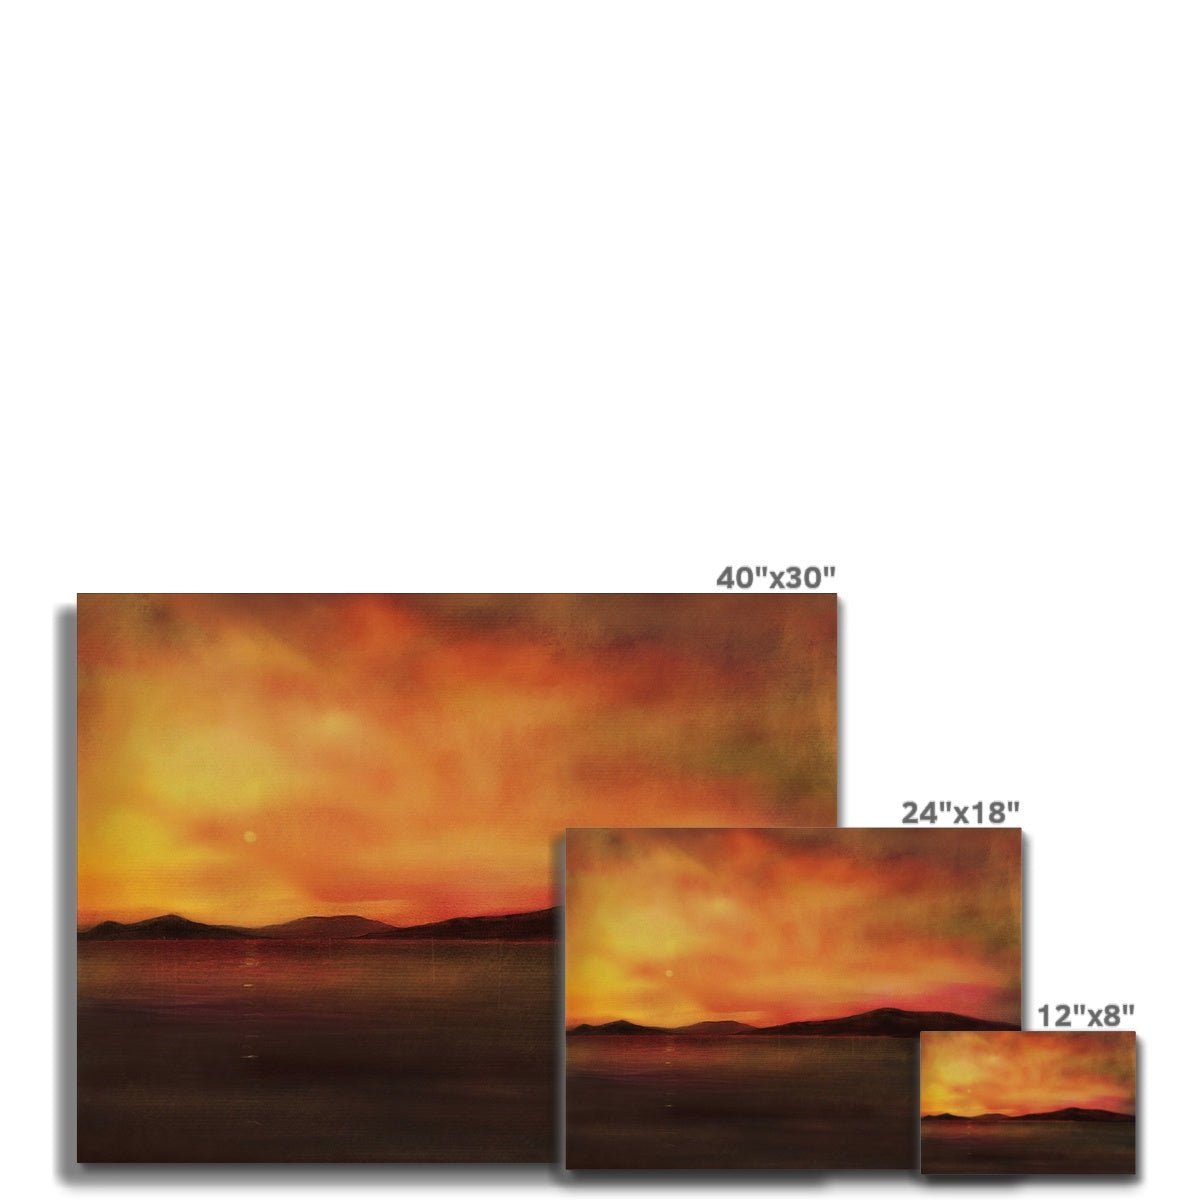 Isle Of Harris Sunset Painting | Canvas From Scotland-Contemporary Stretched Canvas Prints-Hebridean Islands Art Gallery-Paintings, Prints, Homeware, Art Gifts From Scotland By Scottish Artist Kevin Hunter